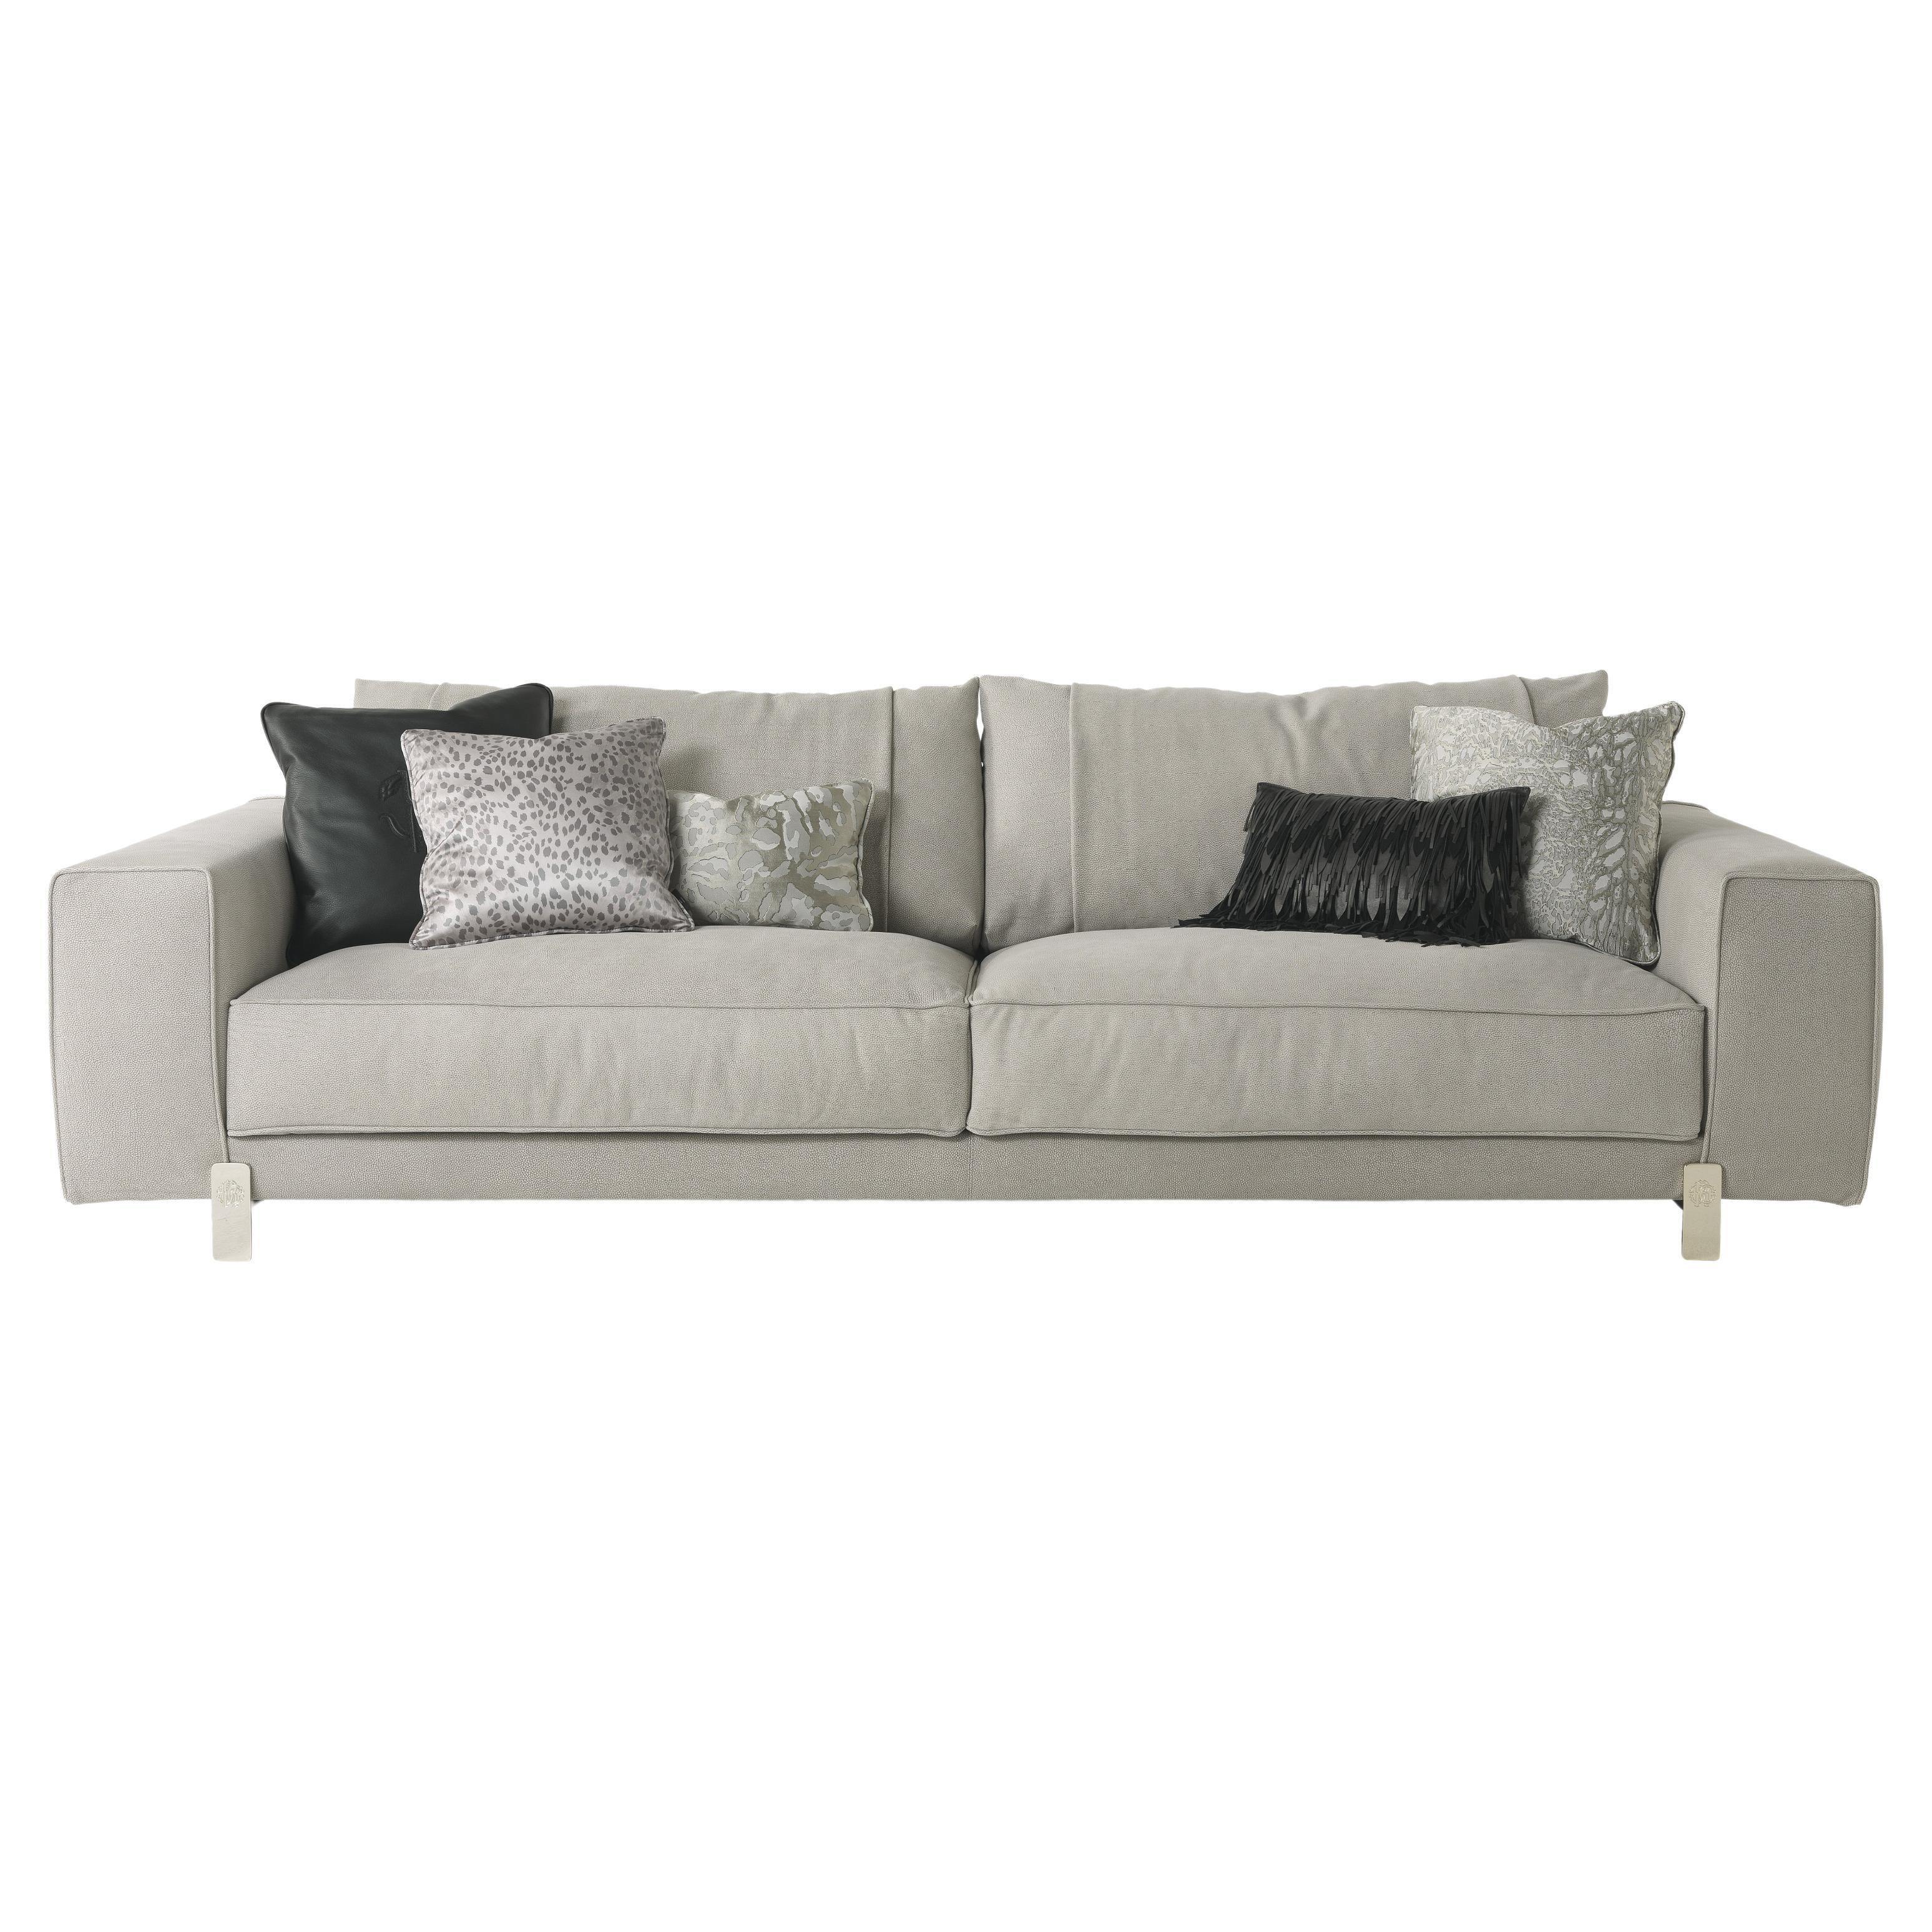 21st Century Caicos 3-Seater Sofa in Leather by Roberto Cavalli Home Interiors  For Sale